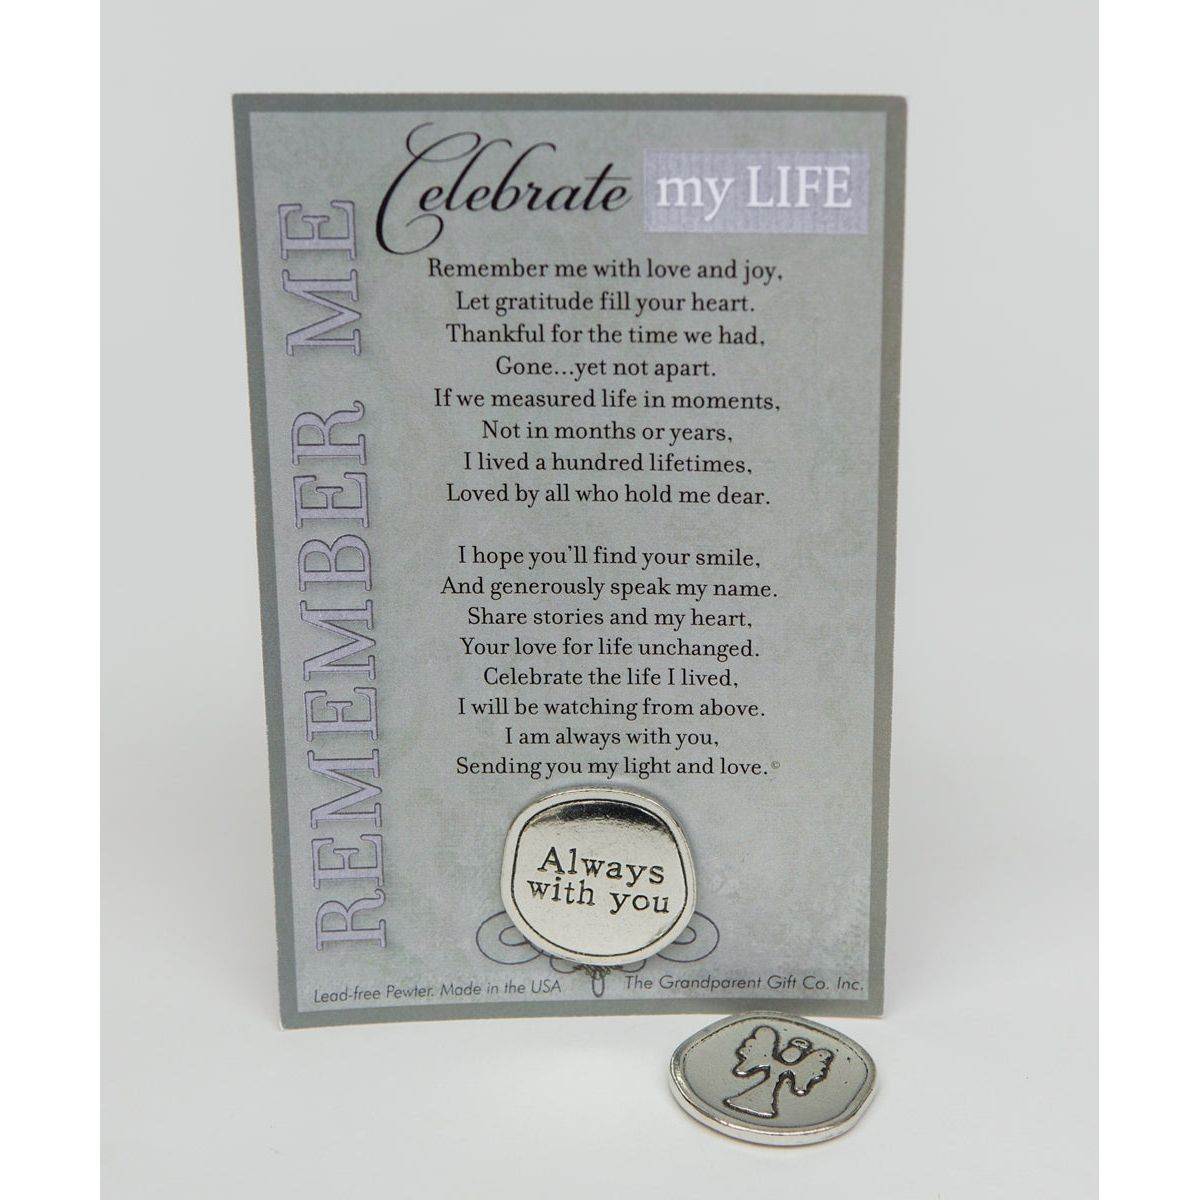 Memorial Gift: Handmade pewter coin with &quot;Always with you&quot; on one side and an angel on the other, packaged in a clear bag with &quot;Celebration of Life&quot; poem